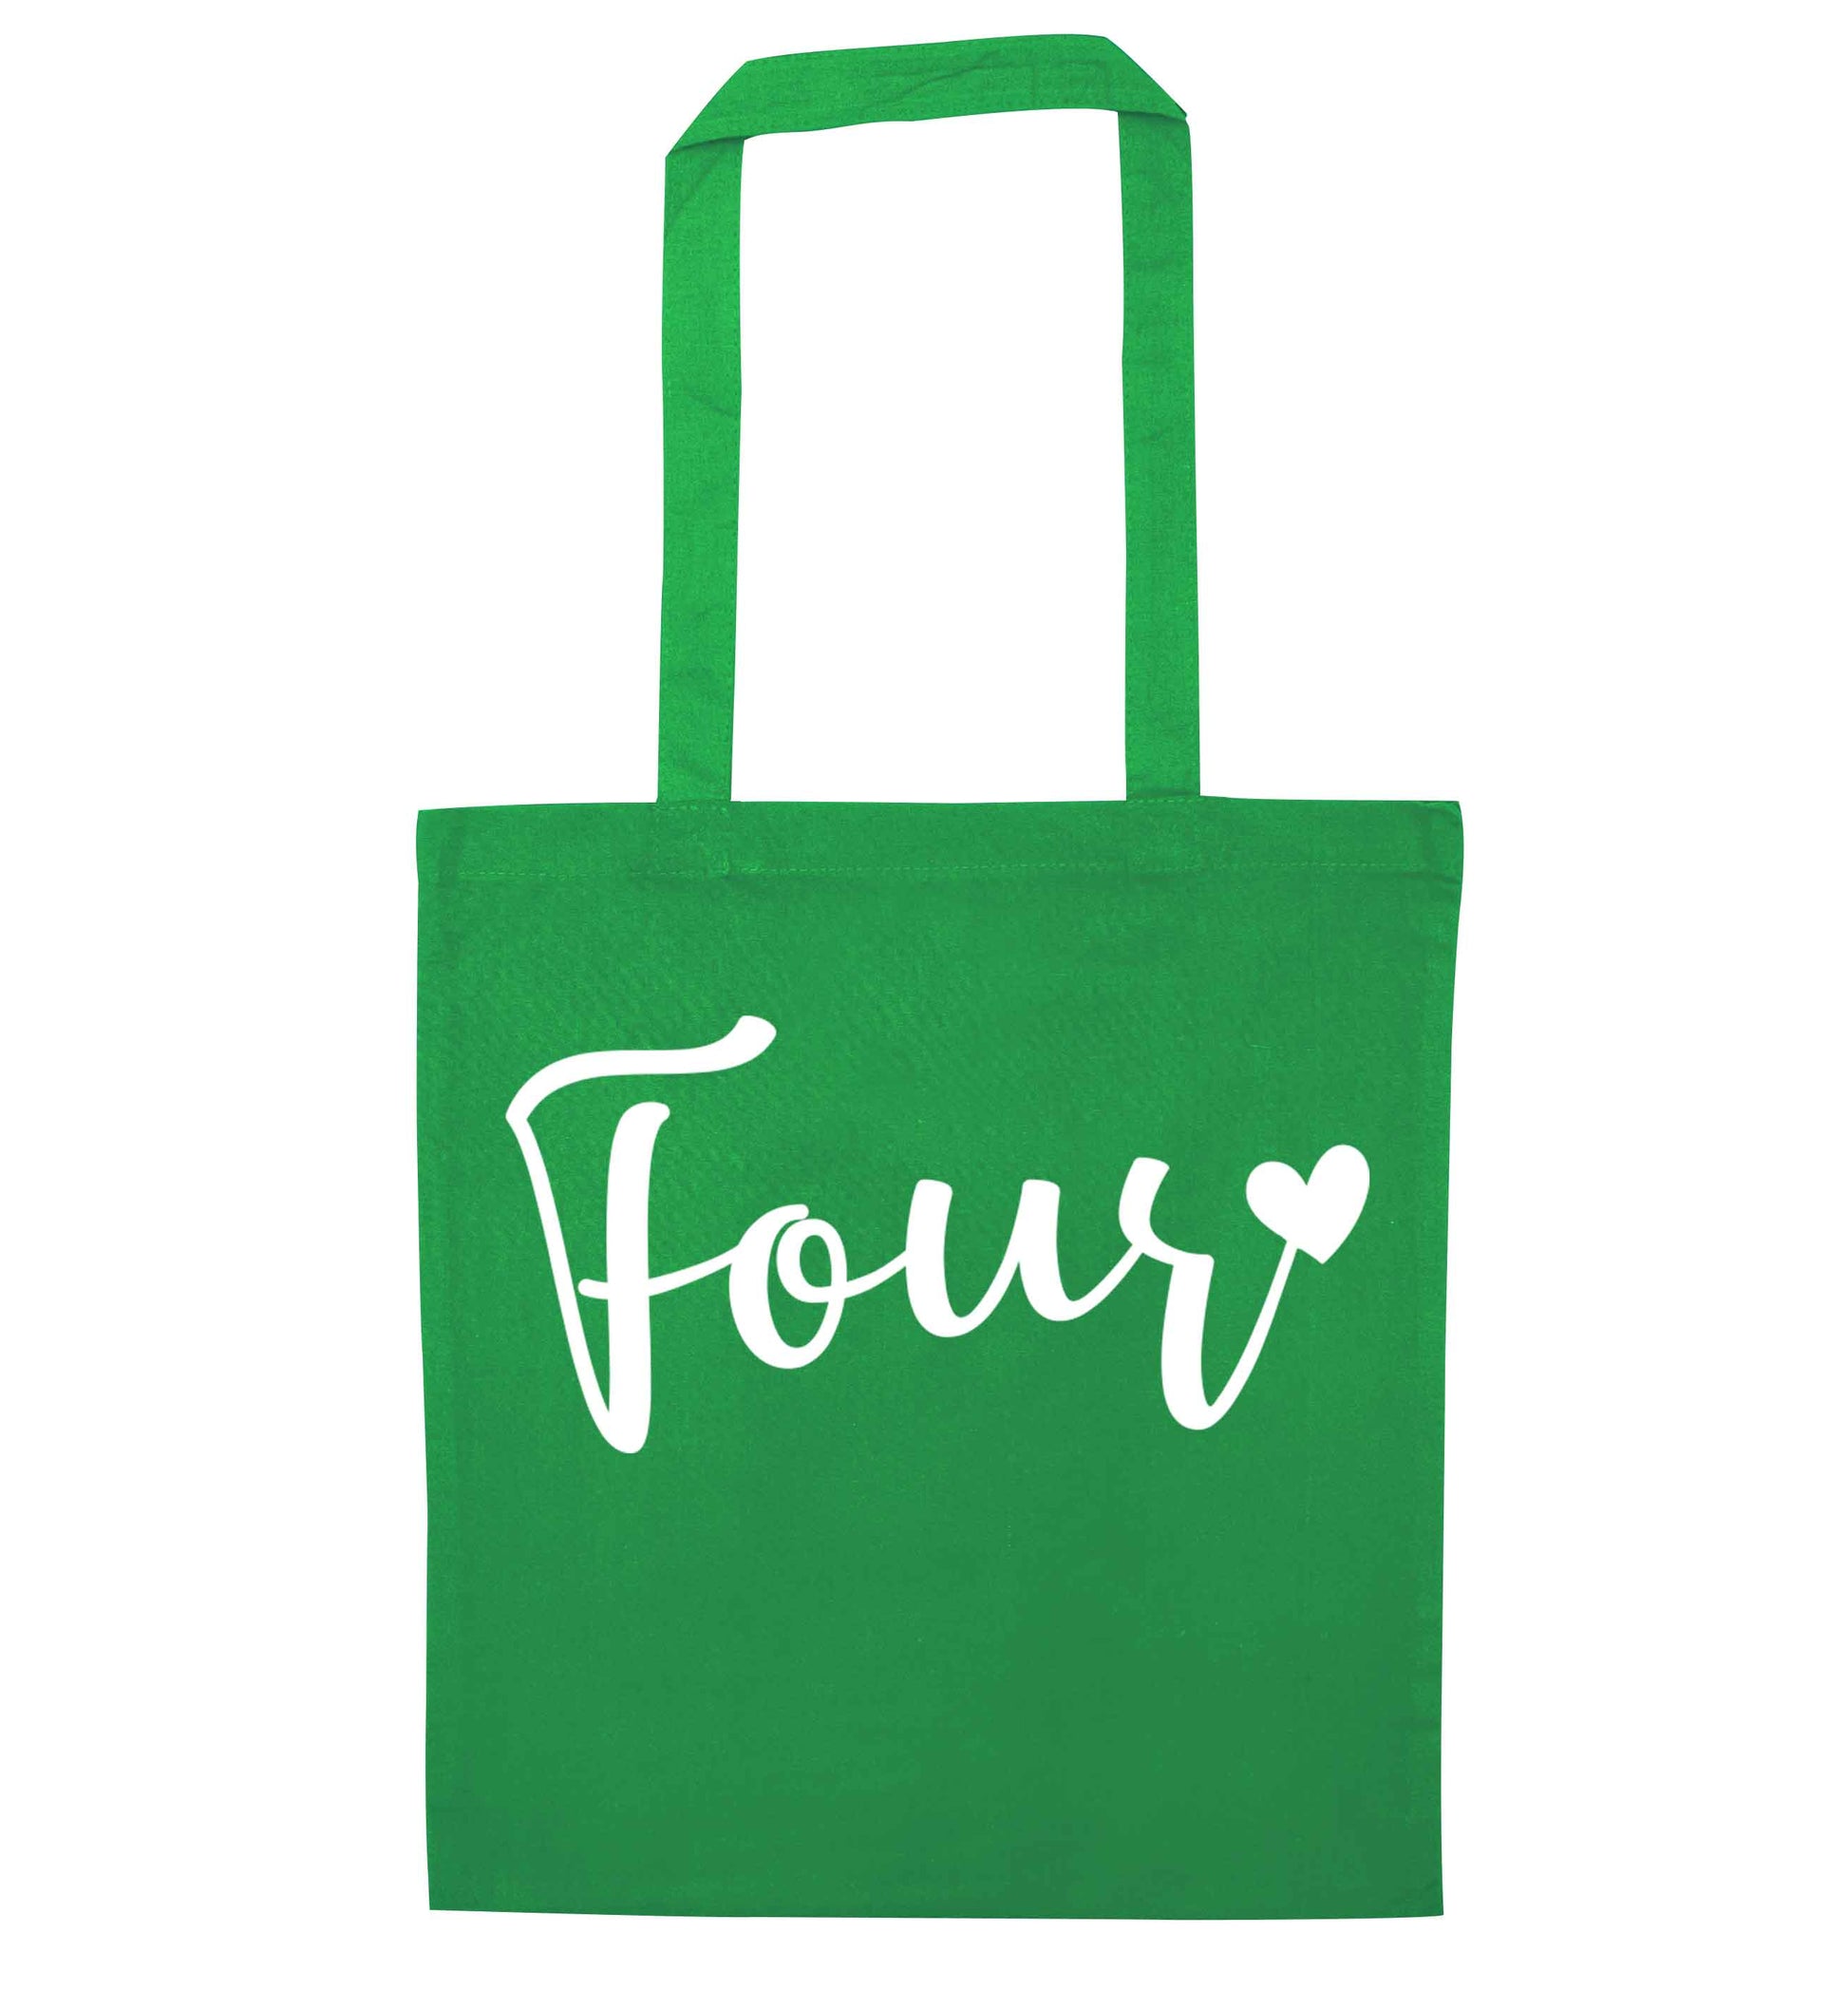 Four and heart green tote bag